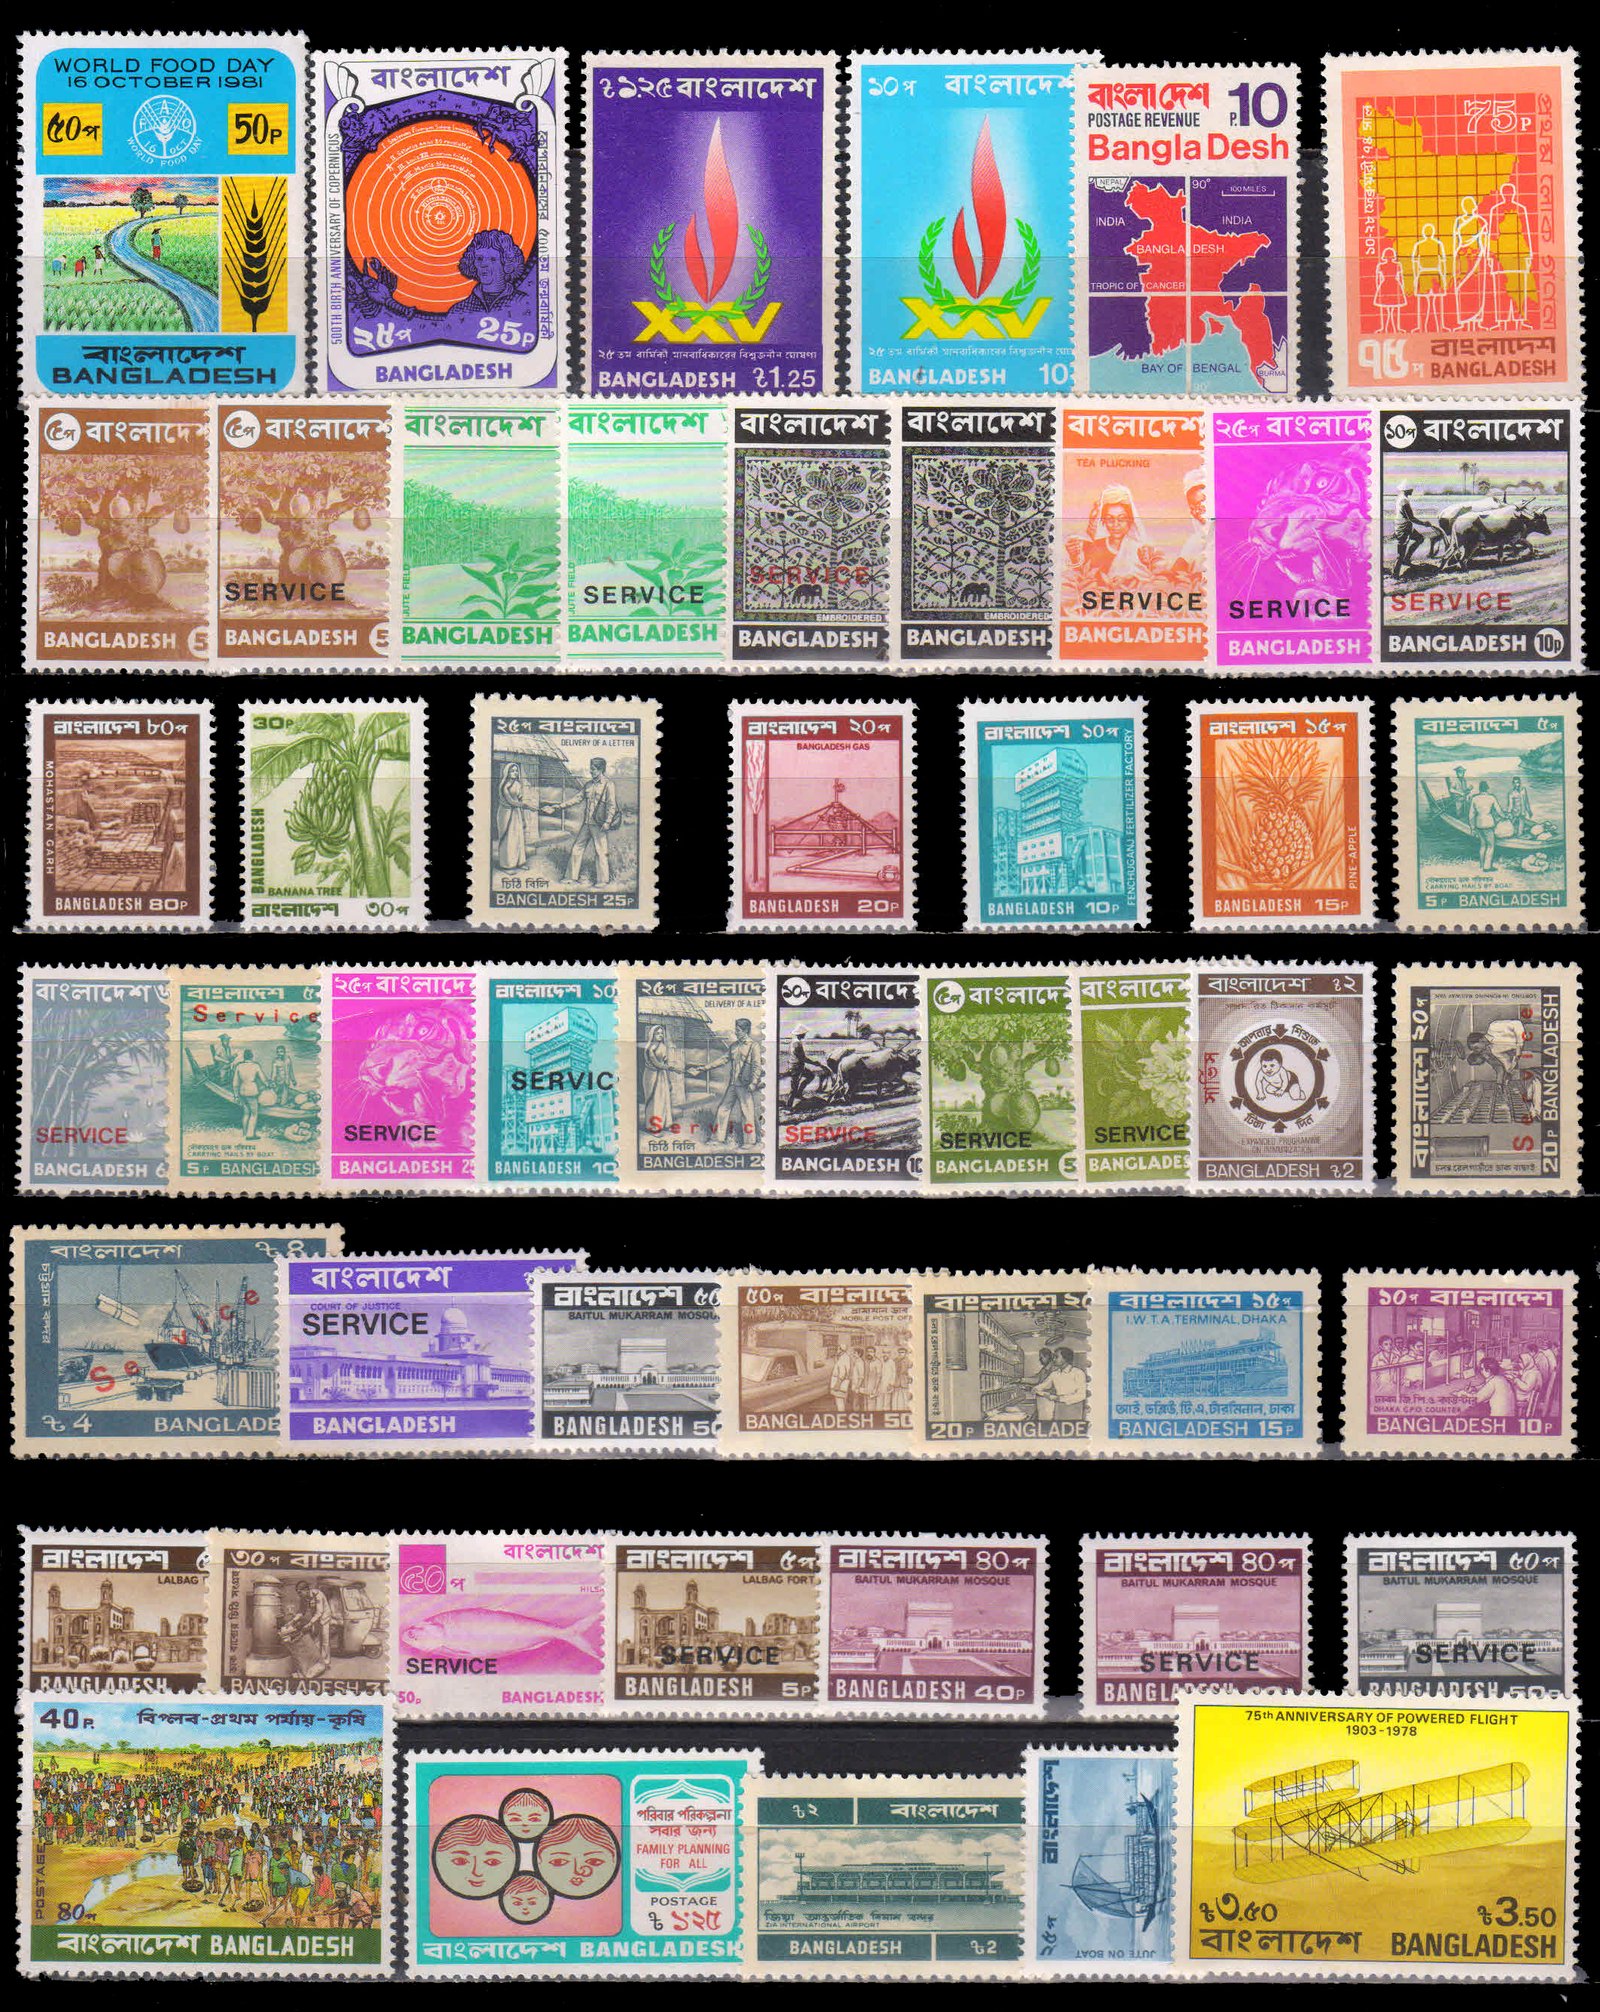 Bangladesh 50 All Different Commemorative & Definitive Stamps, All Mint & Thematic Stamps